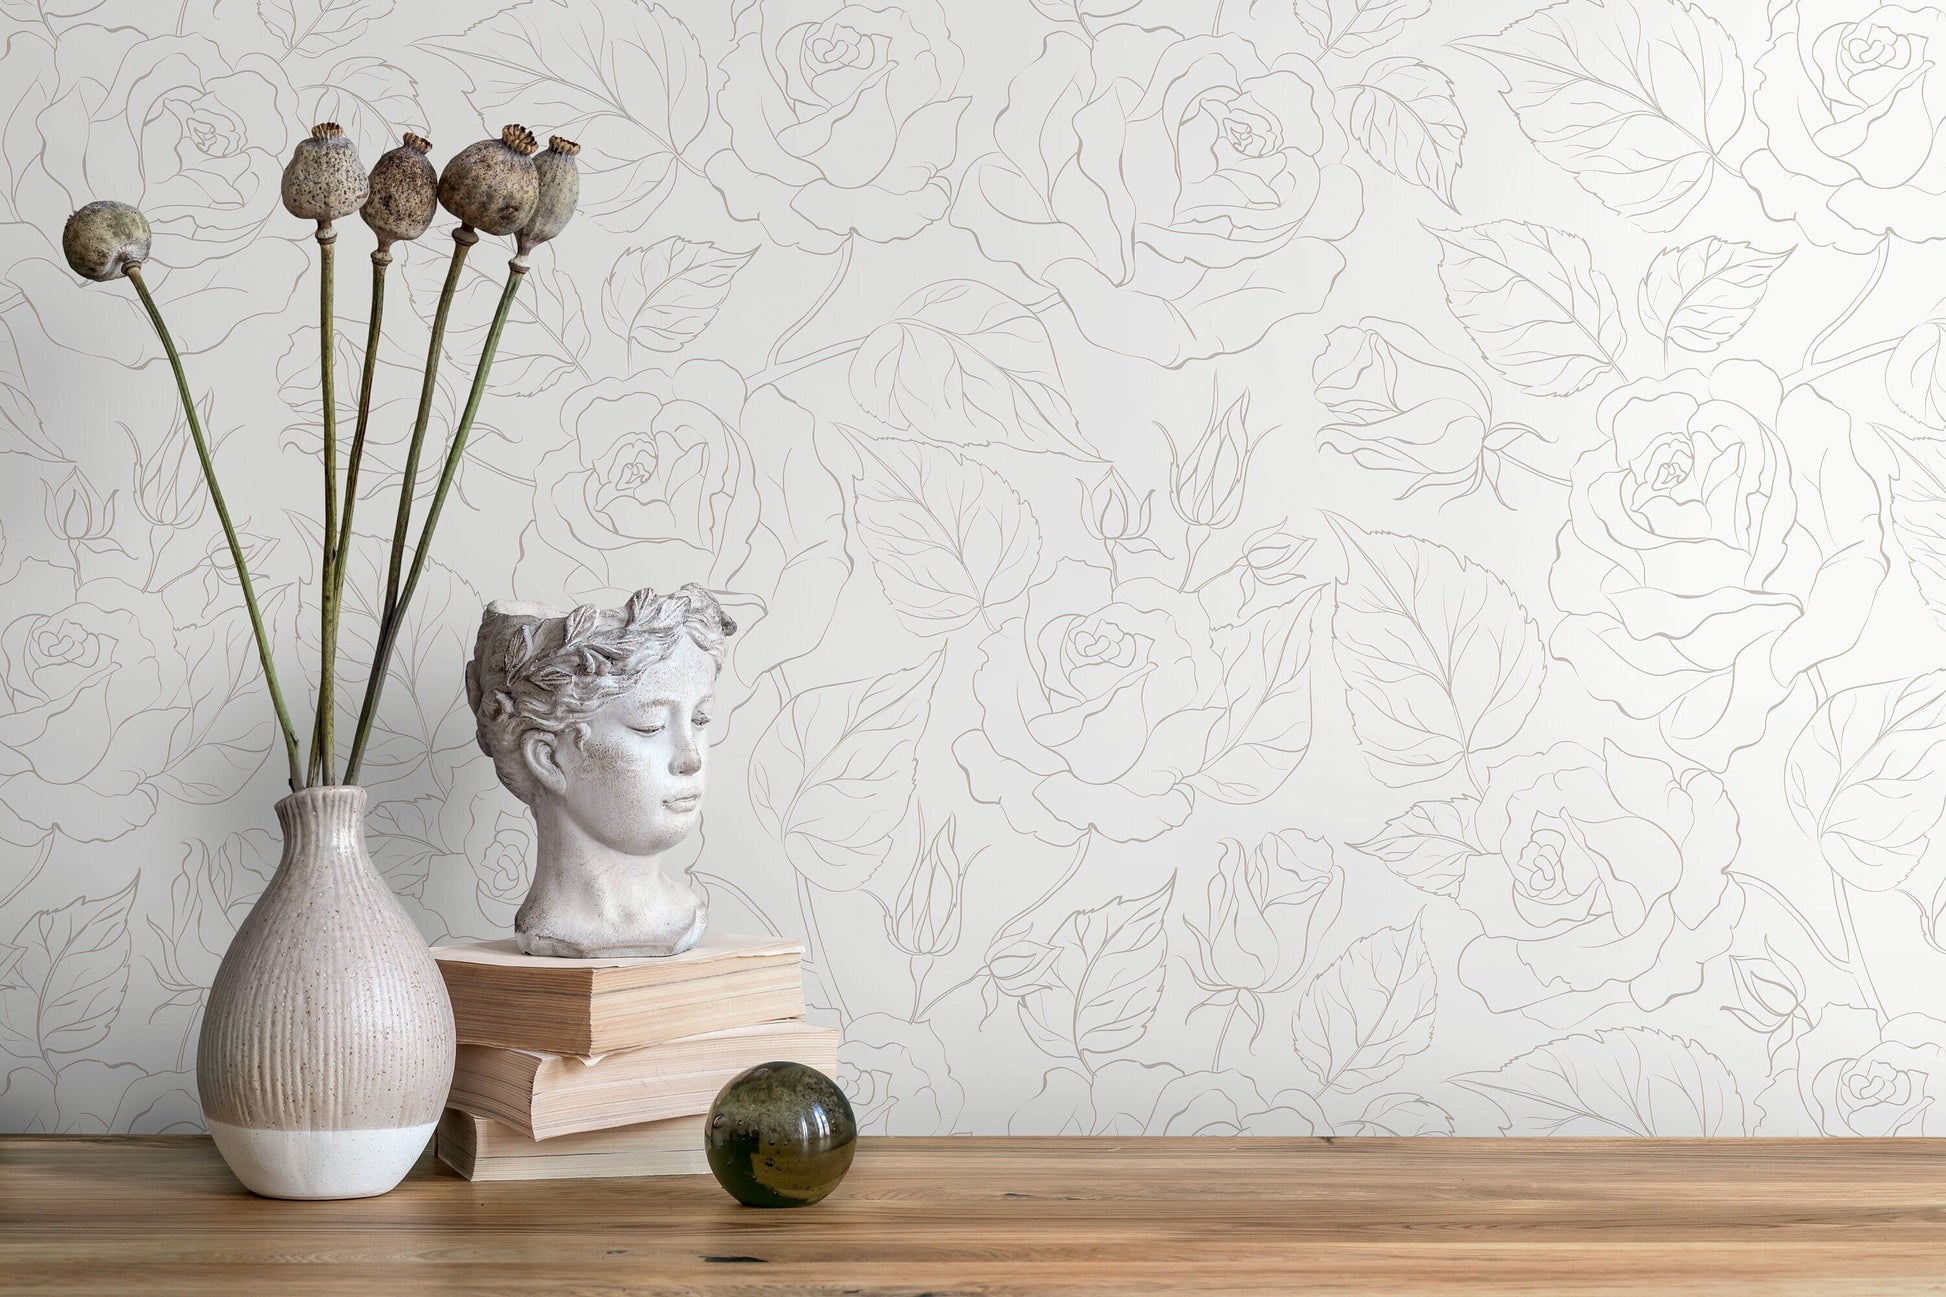 Neutral Boho Minimalist Peony Wallpaper Peel and Stick Removable Repositionable Geometric Minimalistic Abstract - ZADK